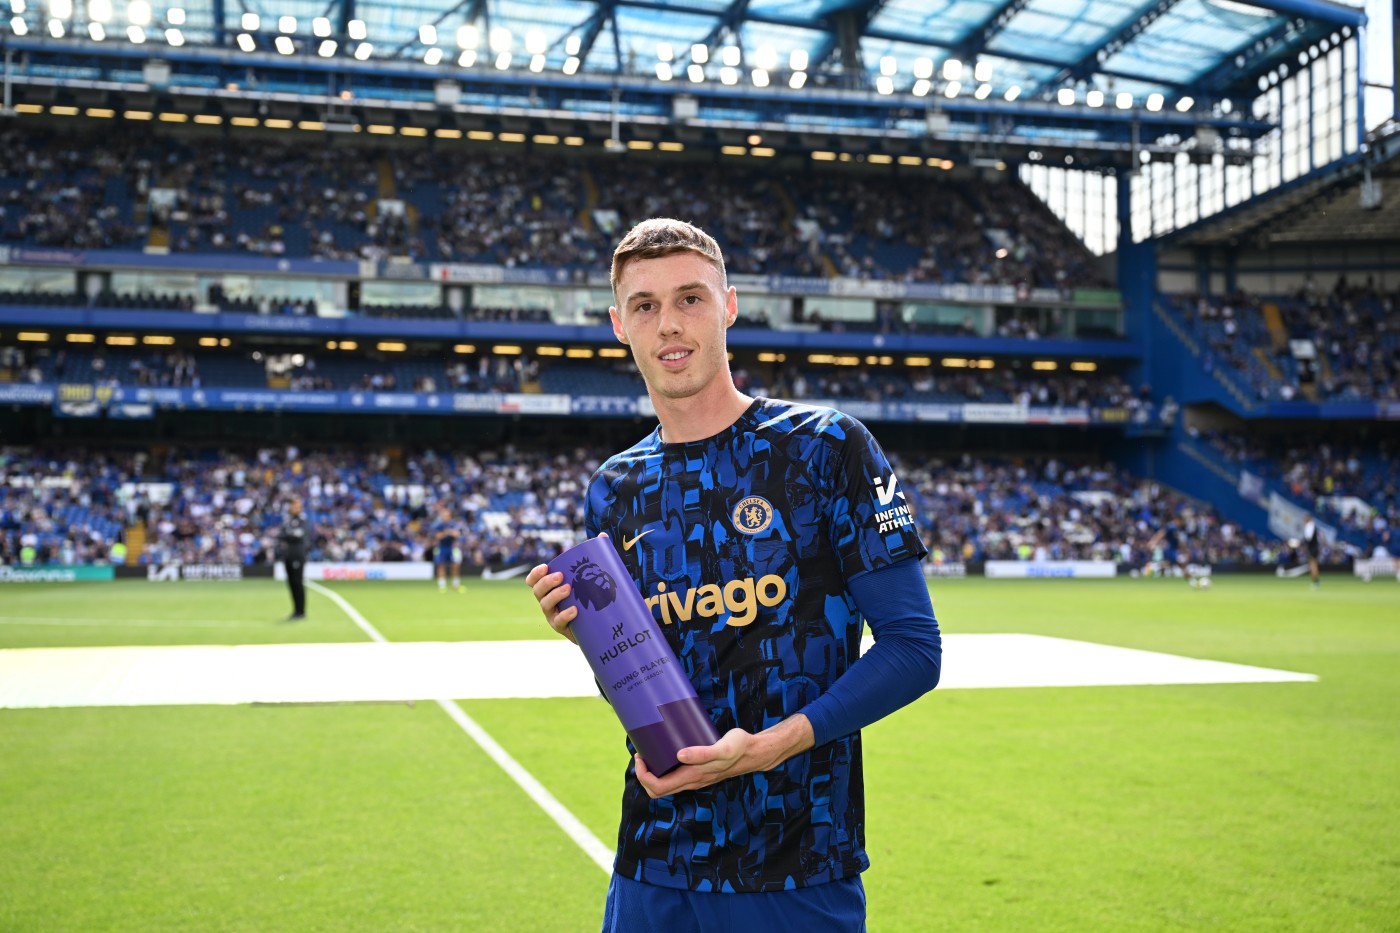 Before kick-off, the fans applauded Cole Palmer as he received his Premier League Young Player of the Year award